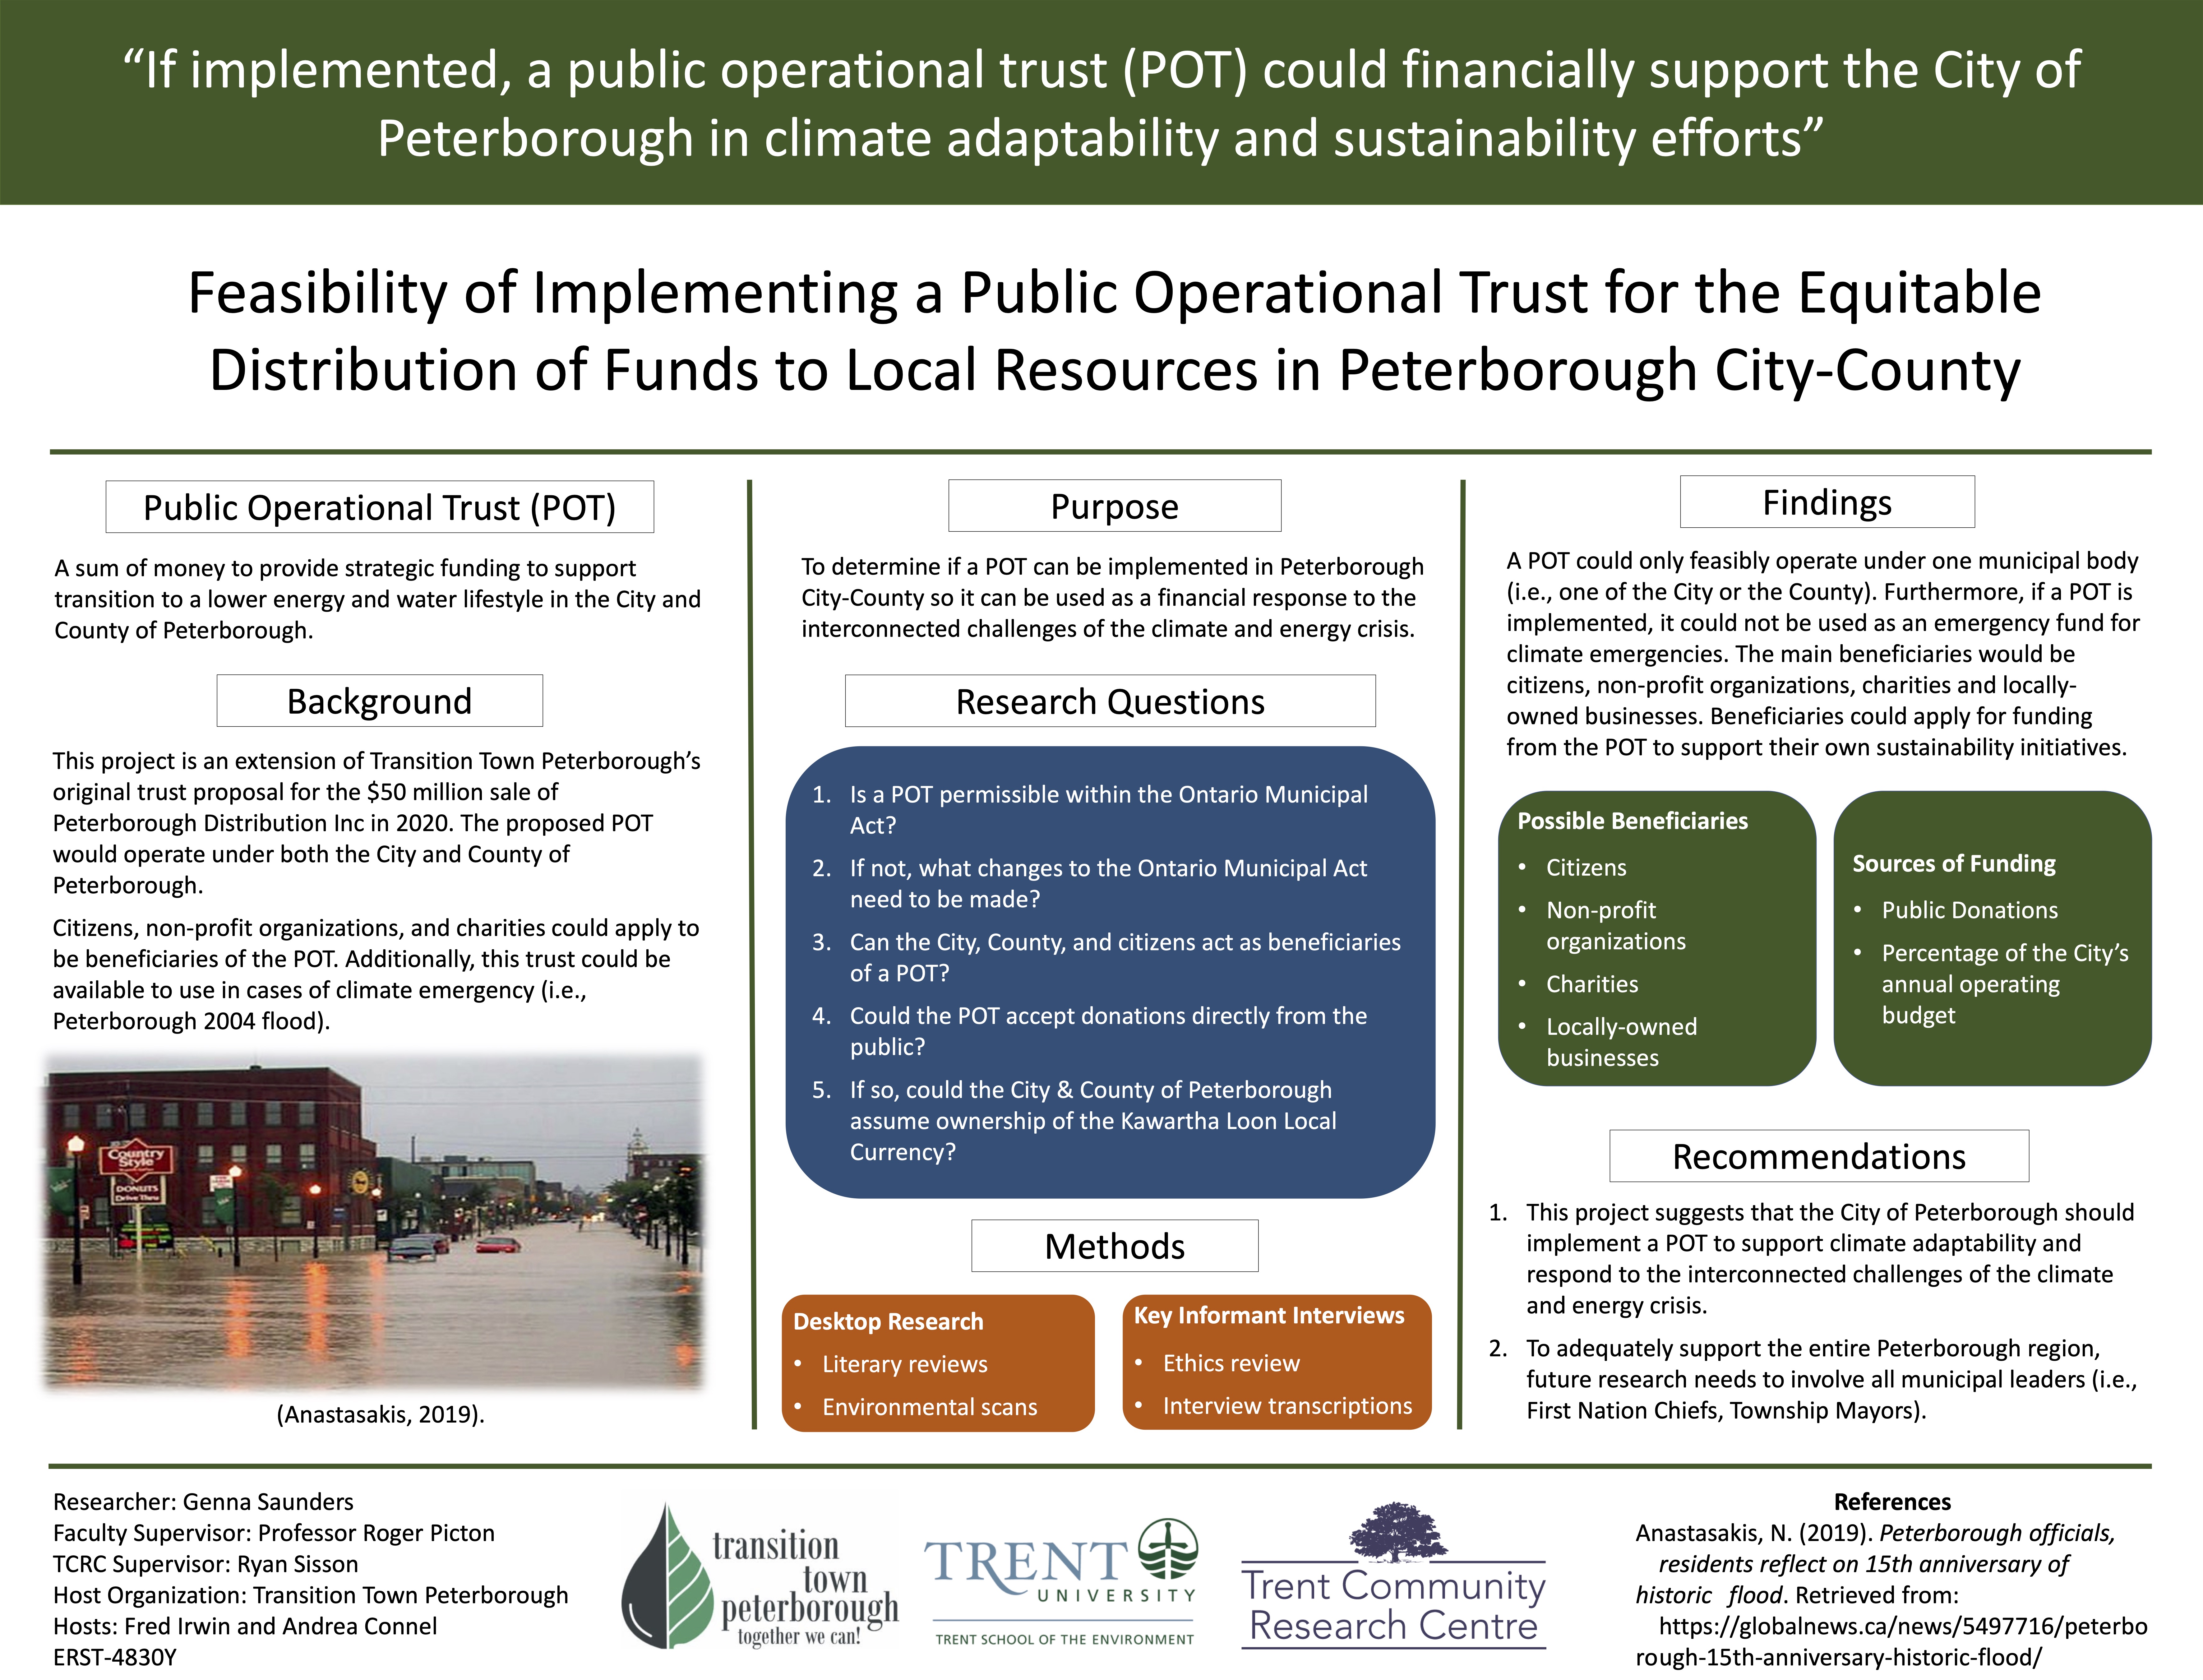 Research poster for Feasibility of Implementing a Public Operational Trust for the Equitable Distribution of Funds to Local Resources in Peterborough City-County